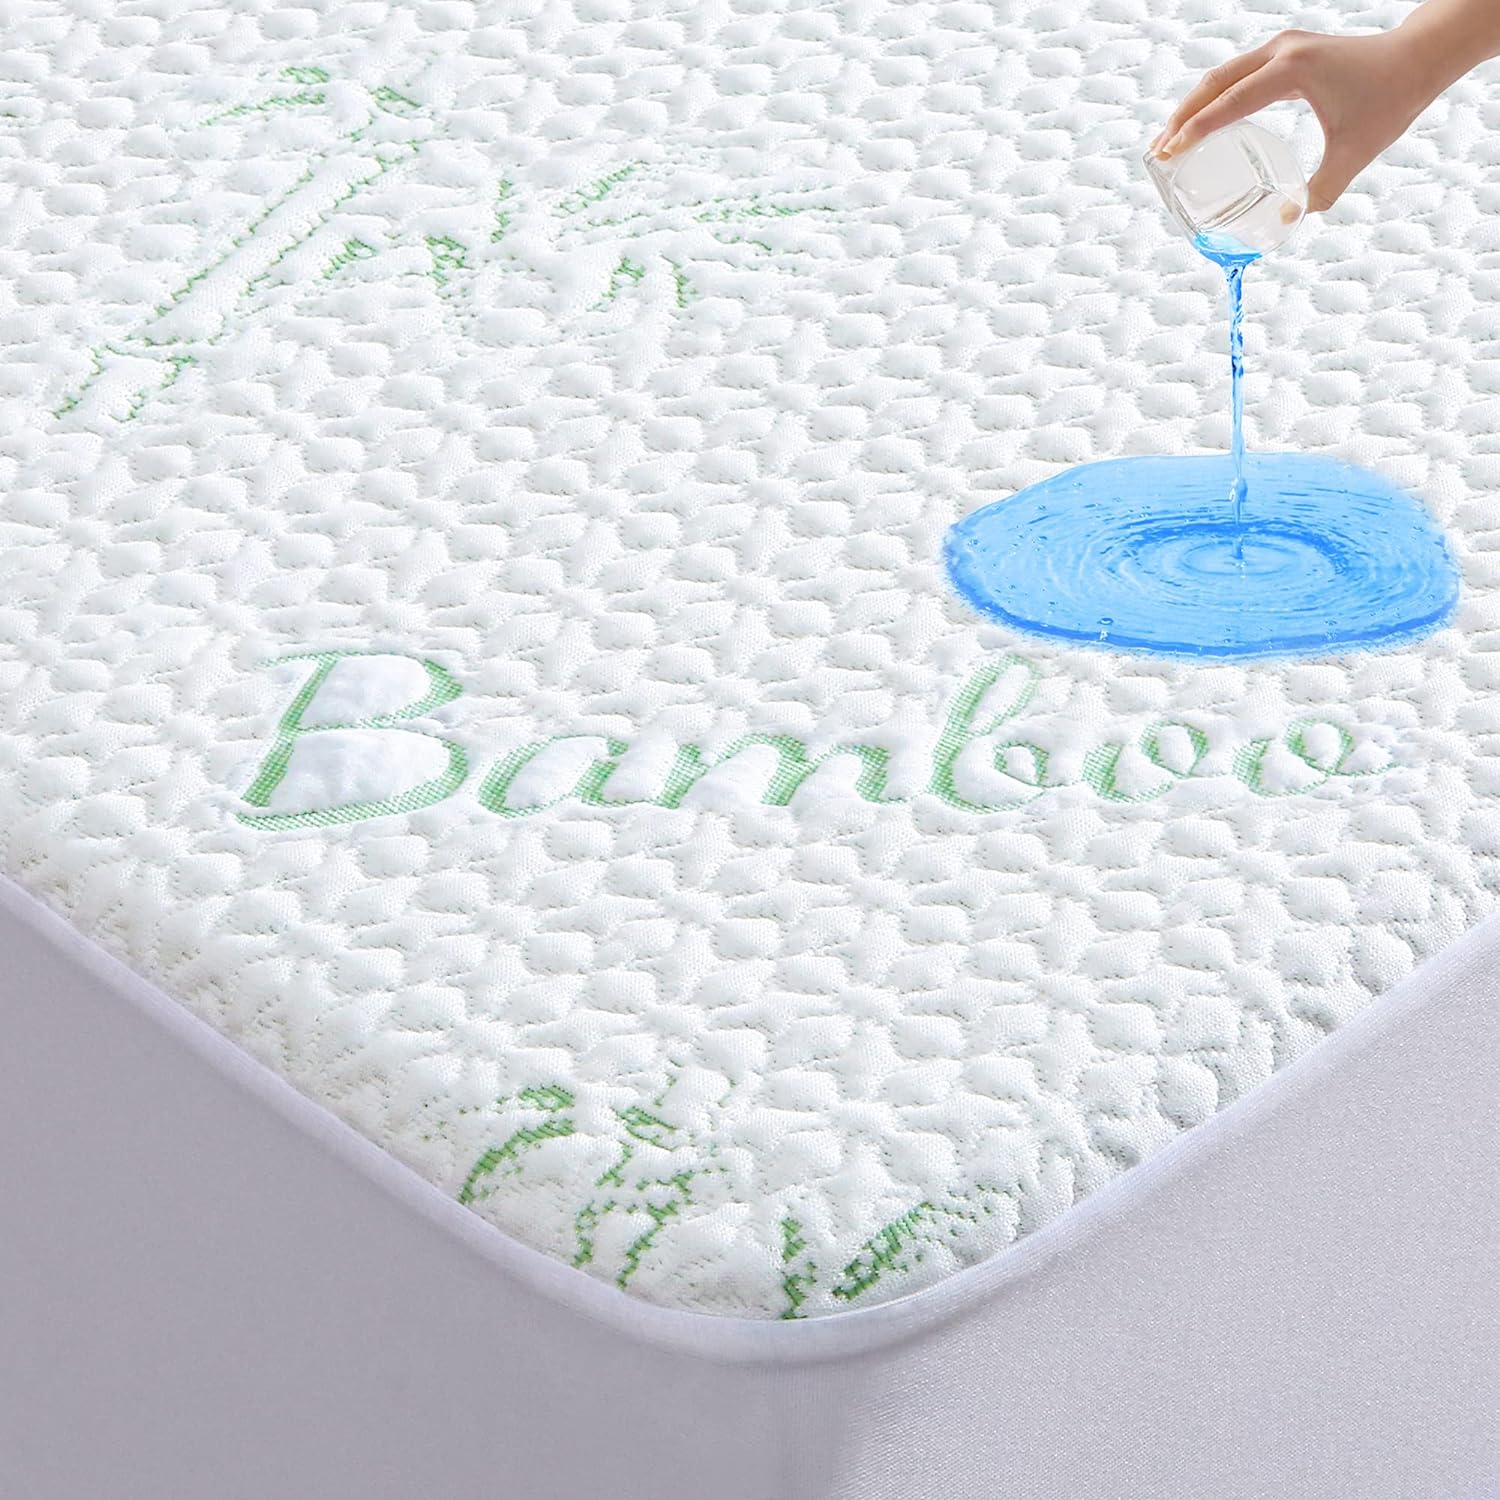 GOONIK Queen Mattress Protector, Bamboo Viscose Waterproof Breathable Queen Size Mattress Pad Cover with 6-18 inches Deep Pocket